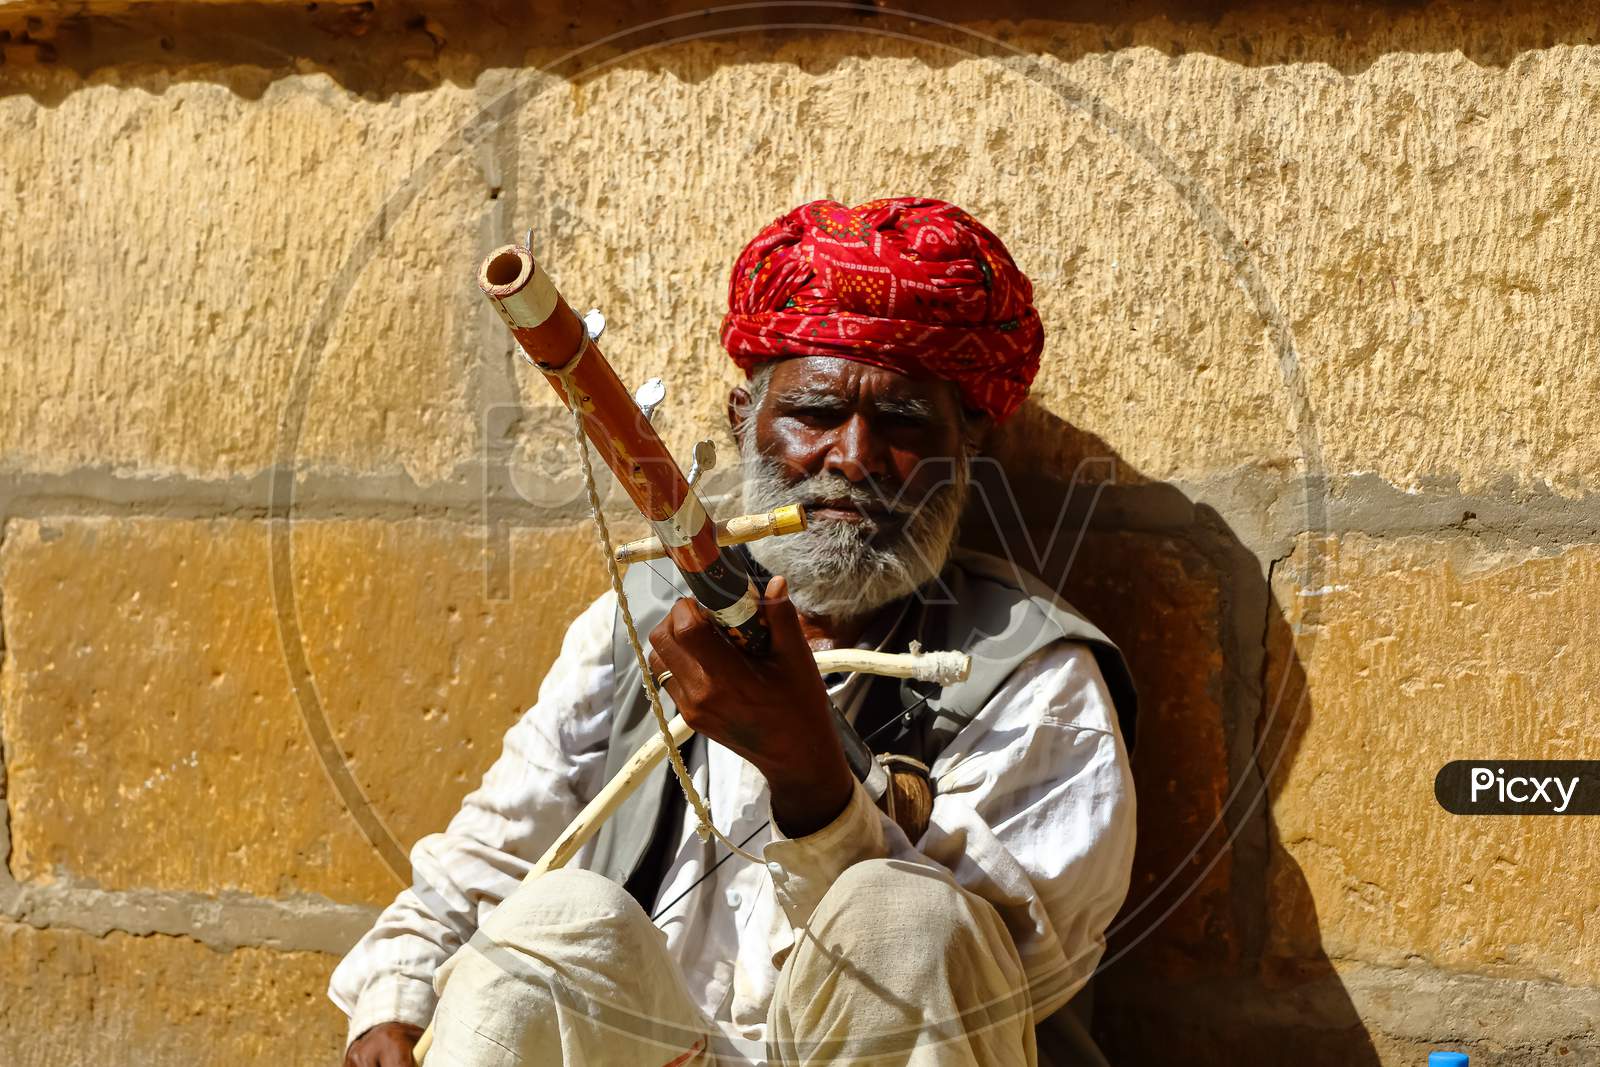 A man wearing turban is siting on ground and playing vilolin at Jaiselmer Rajasthan